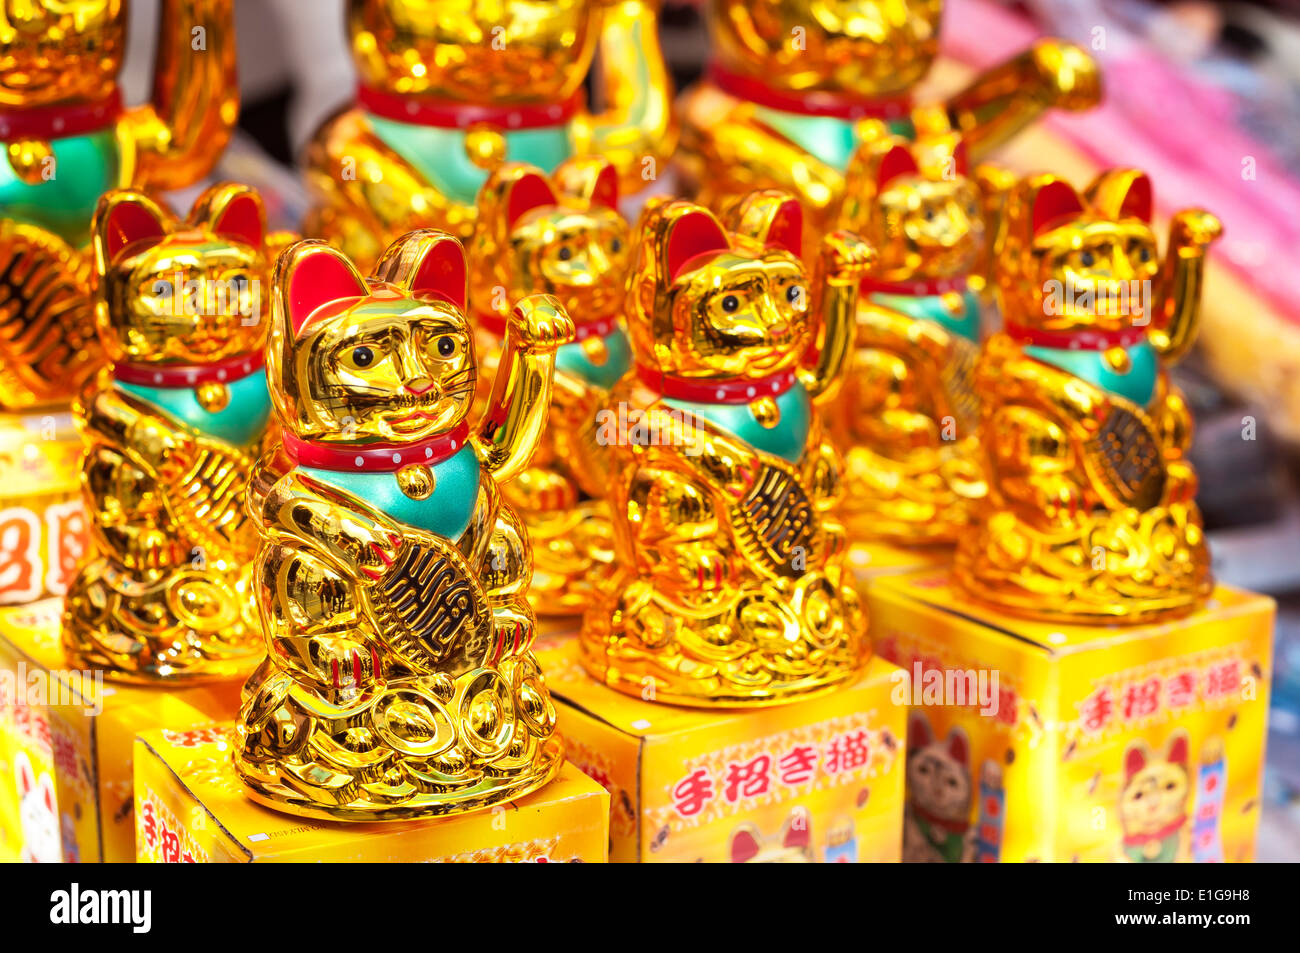 Lucky fortune cats at a Hong Kong market stall Stock Photo